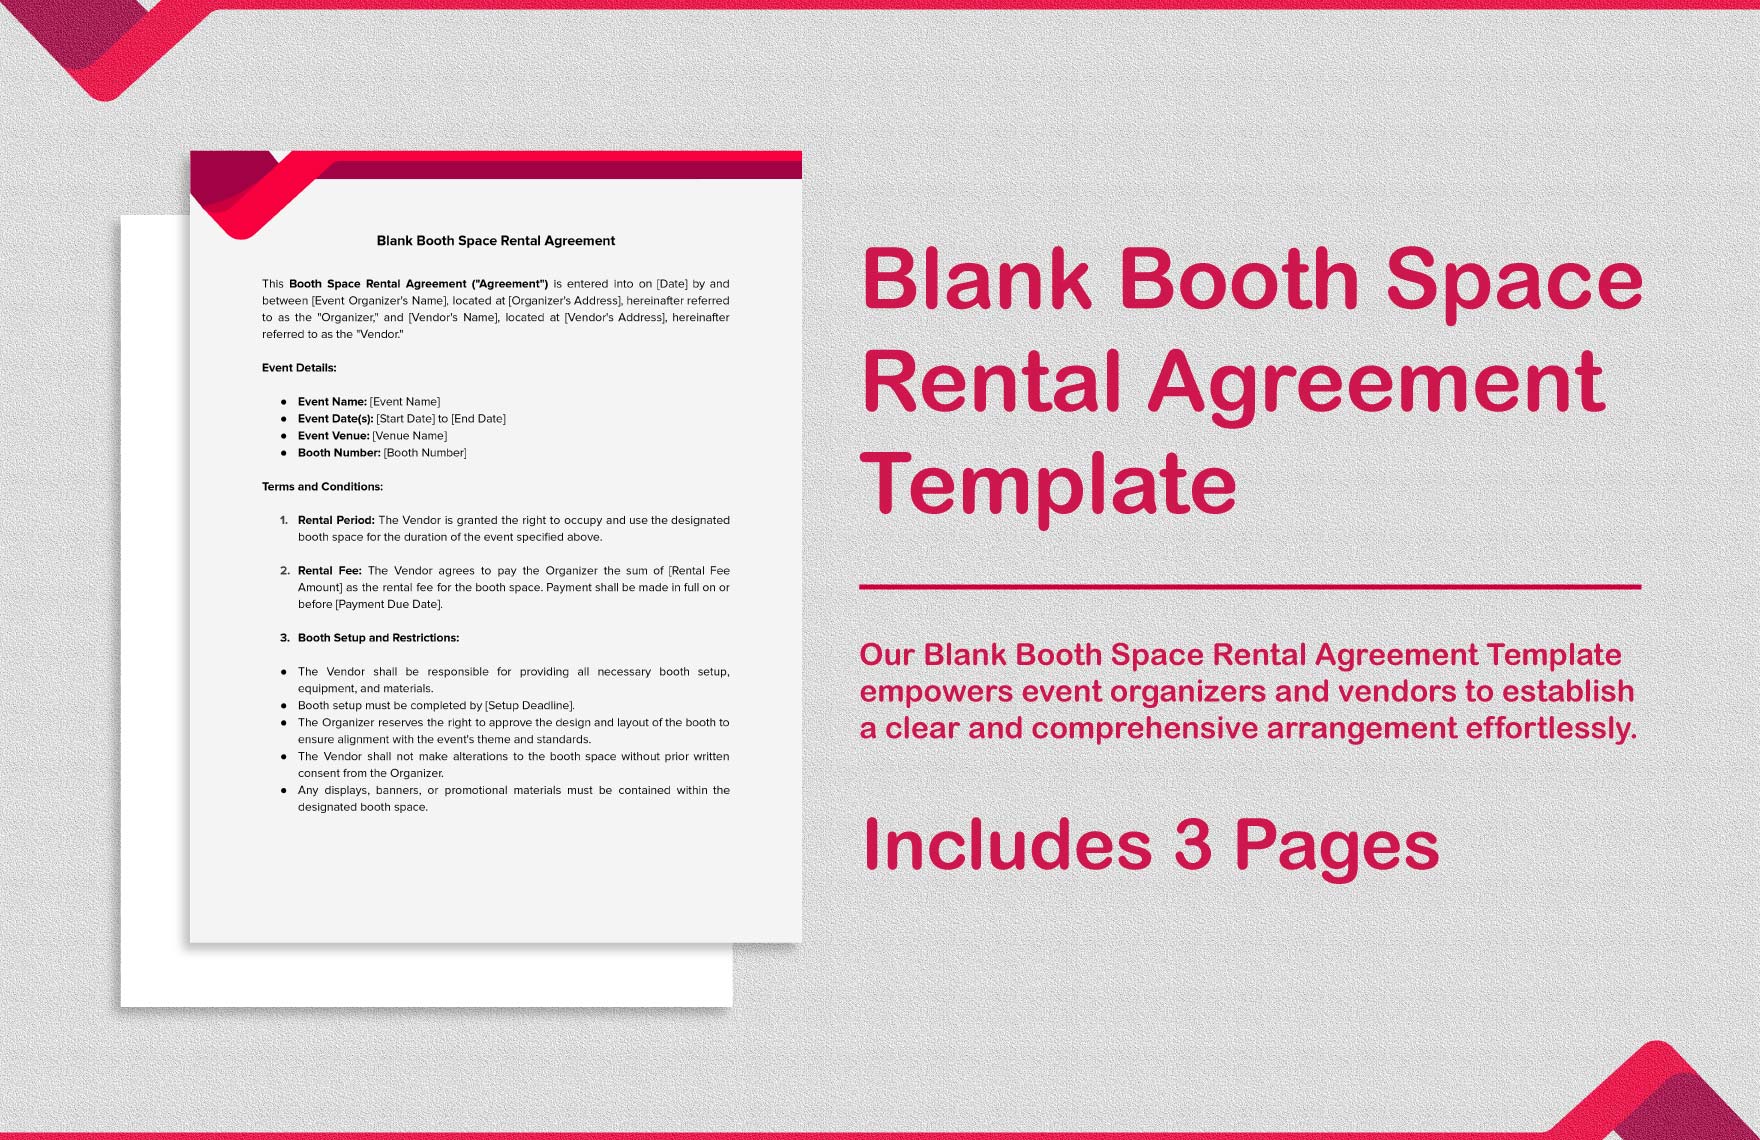 Blank Booth Space Rental Agreement Template 